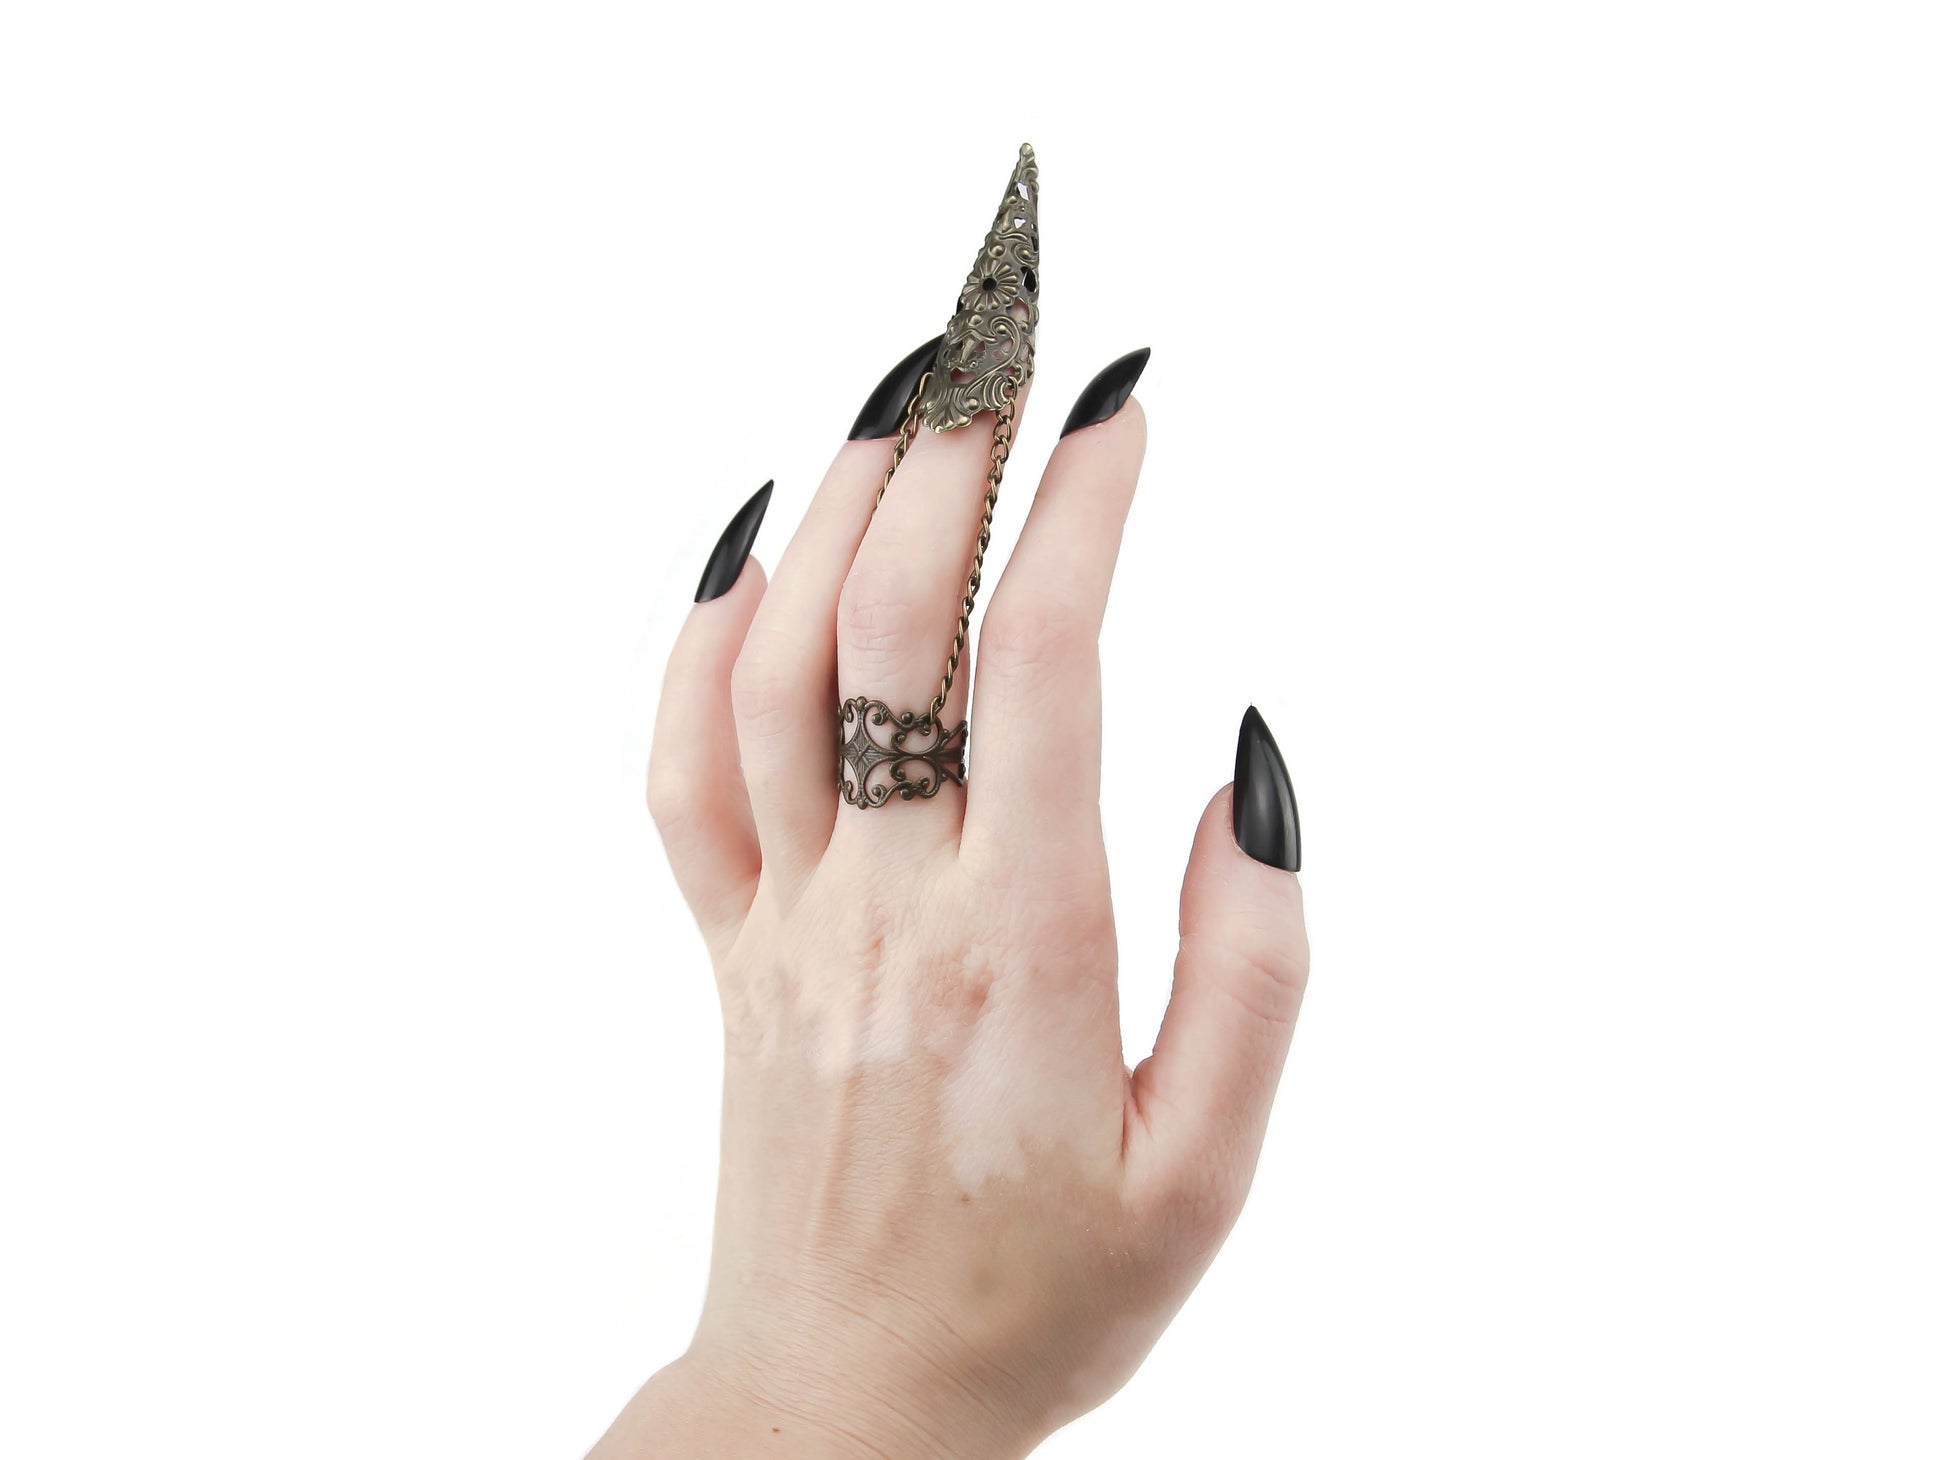 A bold and striking Myril Jewels bronze armor ring with claw, designed with a dark-avantgarde aesthetic, adorns a hand with sleek black nails, perfect for those with a love for gothic, Witchcore, and Neo Gothic styles. This finely crafted piece is a testament to gothic-chic sophistication, making it a versatile choice for Halloween, everyday wear, or as a statement accessory for the alternative fashion lover.